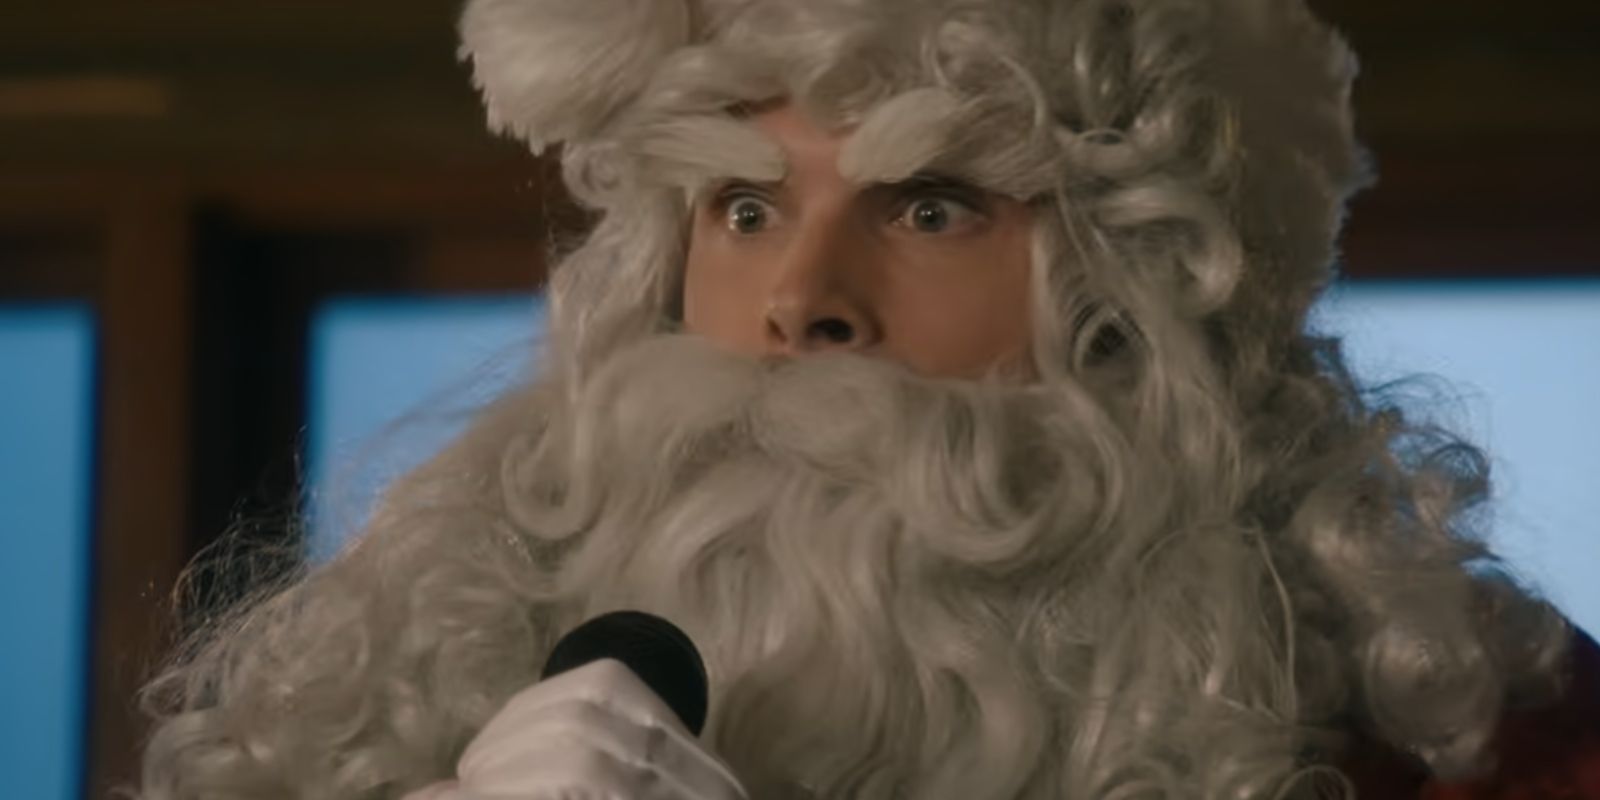 Carter holds a microphone while dressed as Santa in Holiday in the Vineyards.